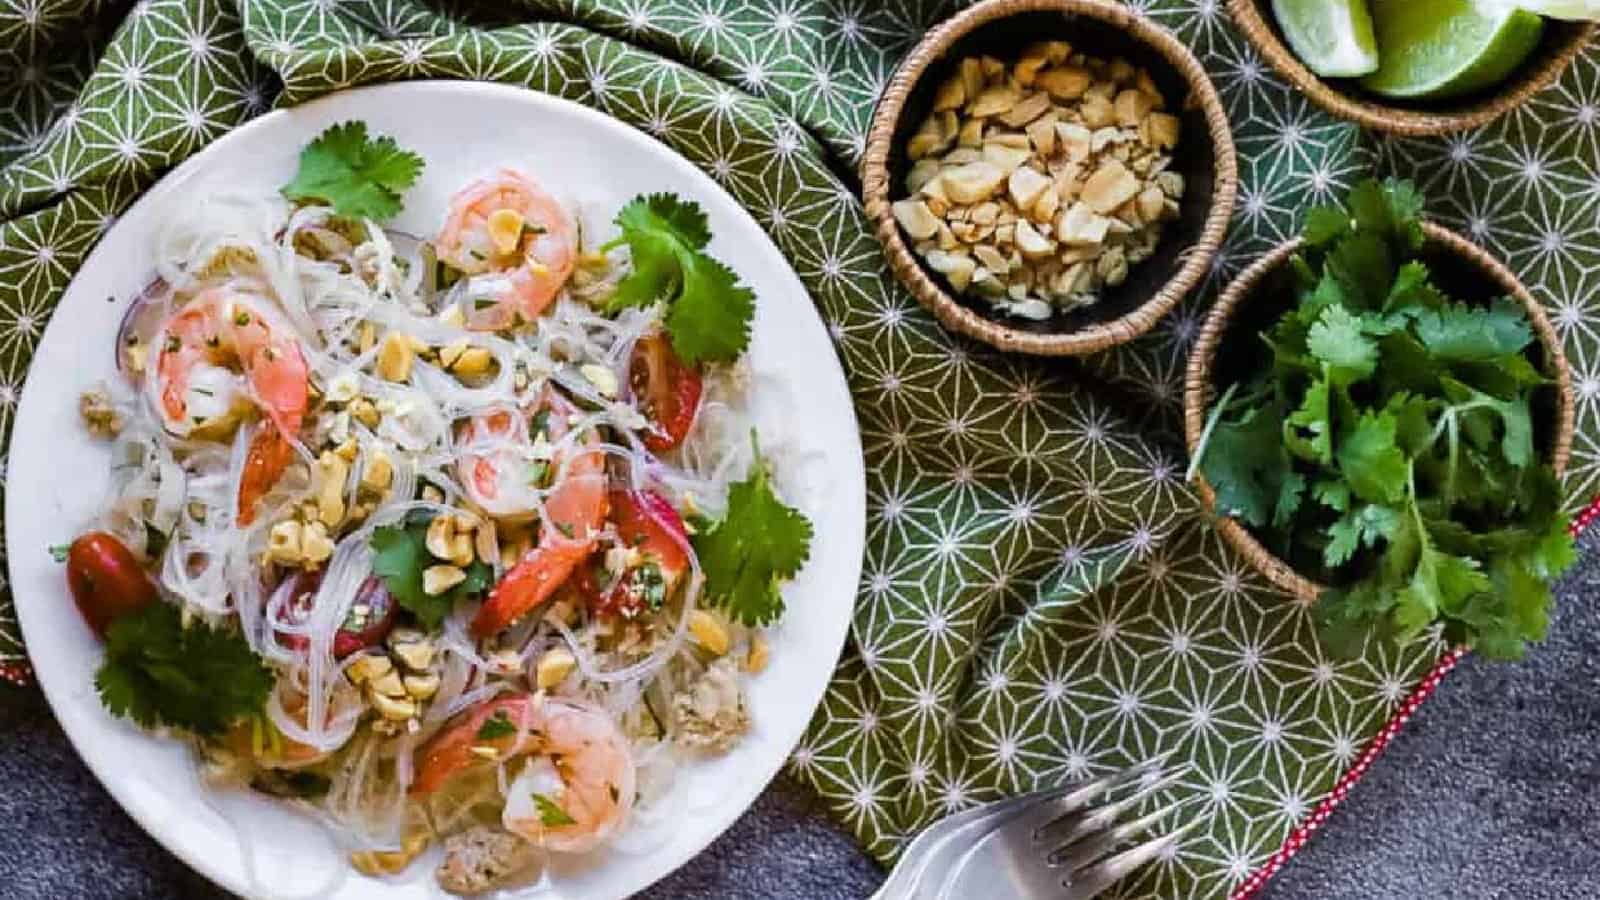 <p>Explore new horizons with Yum Woon Sen. This noodle salad overflowing with seafood overtones is an ode to Thai cuisine. A unique addition to your meal spread, let it whisk you off to the beaches of Thailand for a tasteful midweek surprise.<br><strong>Get the Recipe: </strong><a href="https://allwaysdelicious.com/yum-woon-sen/?utm_source=msn&utm_medium=page&utm_campaign=msn">Yum Woon Sen</a></p> <p>The post <a href="https://tastesdelicious.com/seafood-specials/">Seaside Delights: Get Hooked On These 21 Seafood Specials</a> appeared first on <a href="https://tastesdelicious.com">Tastes Delicious</a>.</p>